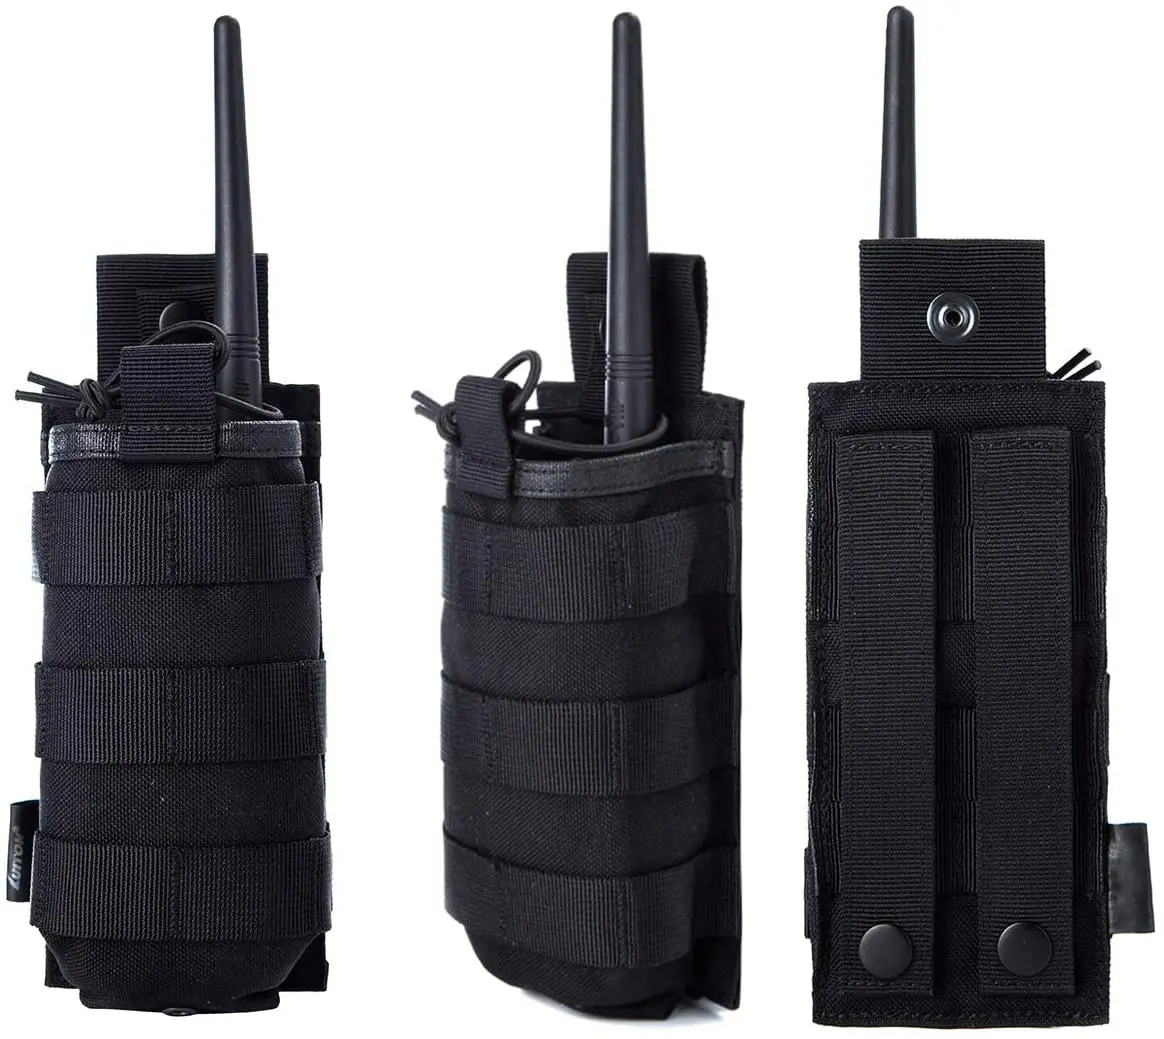 Fireproof Walkie Talkies Two Way Radio Nylon Case Holder Pouch For ...